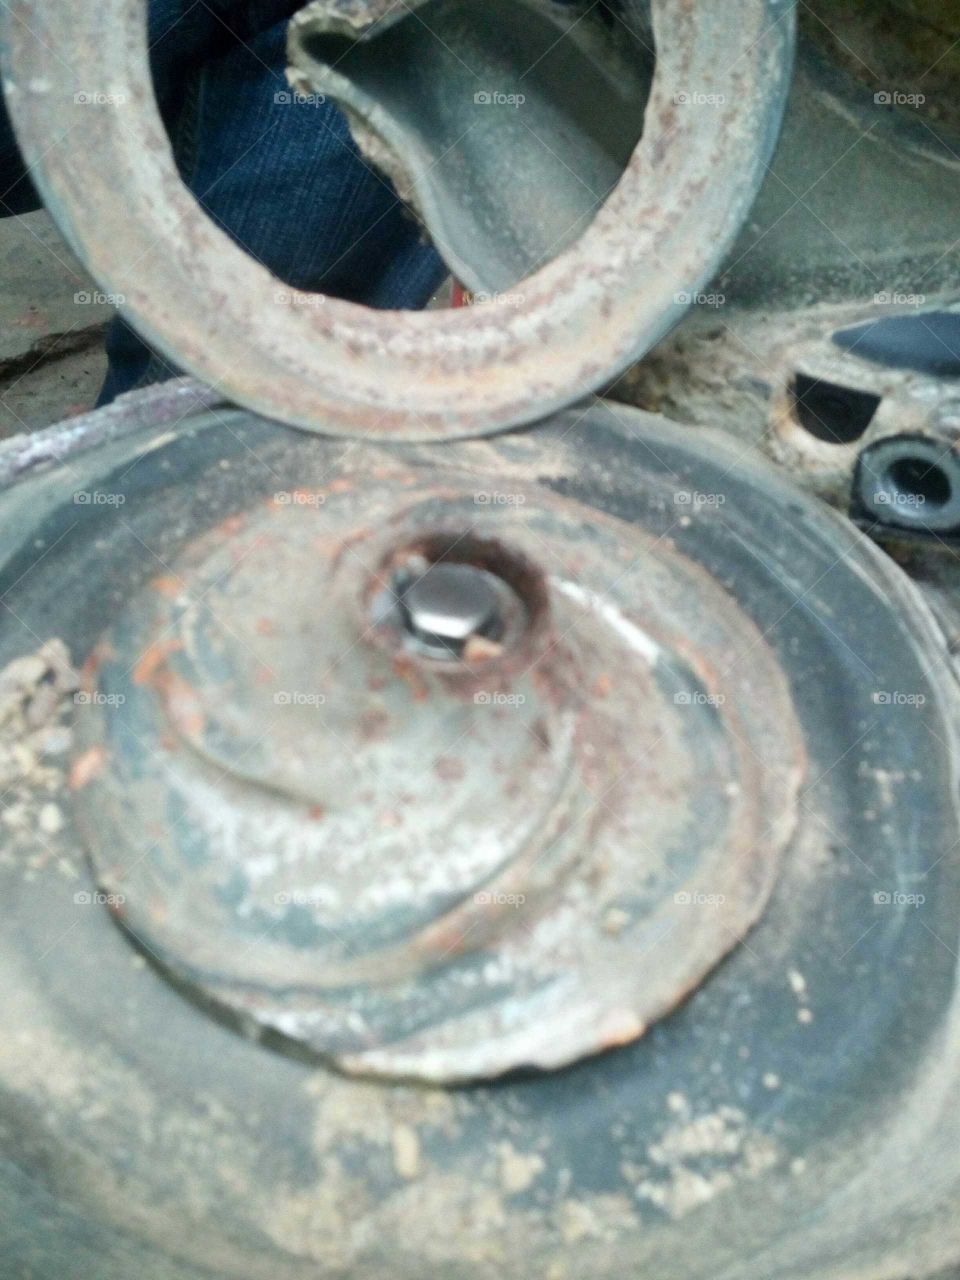 An impeller used in long operating hours, resulting in corrosion of the material